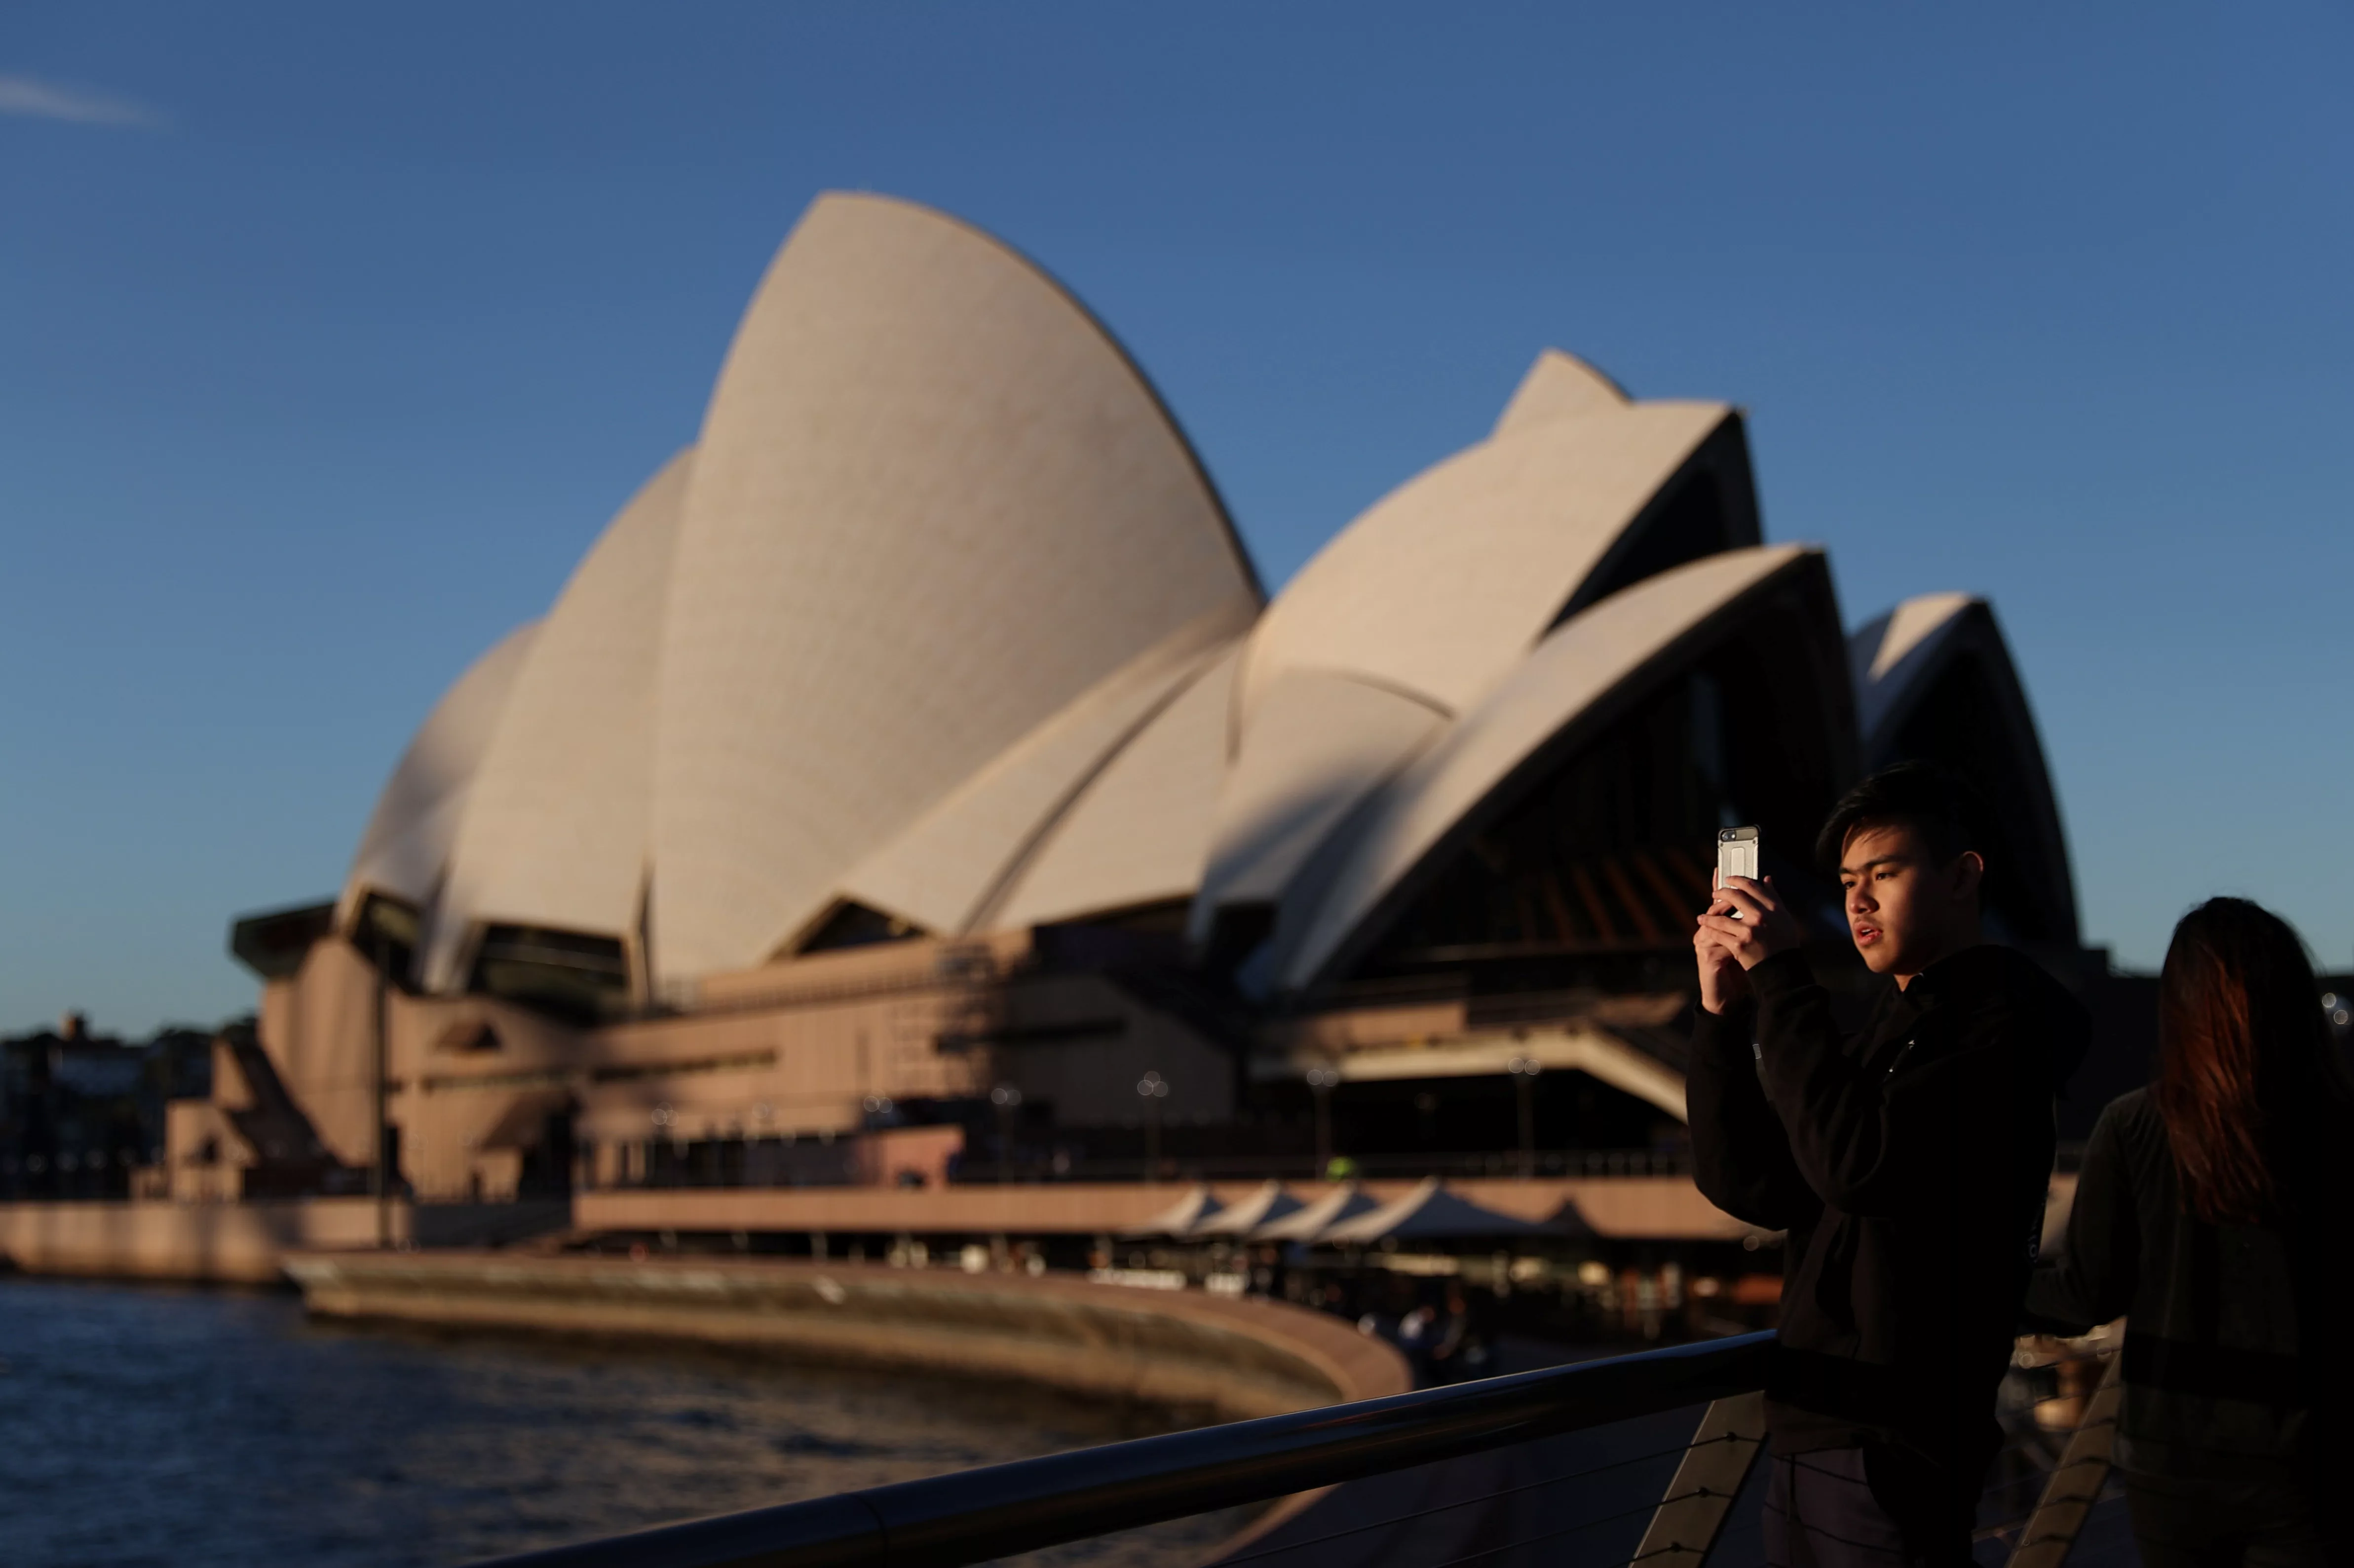 a-young-man-films-with-his-phone-in-front-of-the-sydney-opera-house-in-sydney